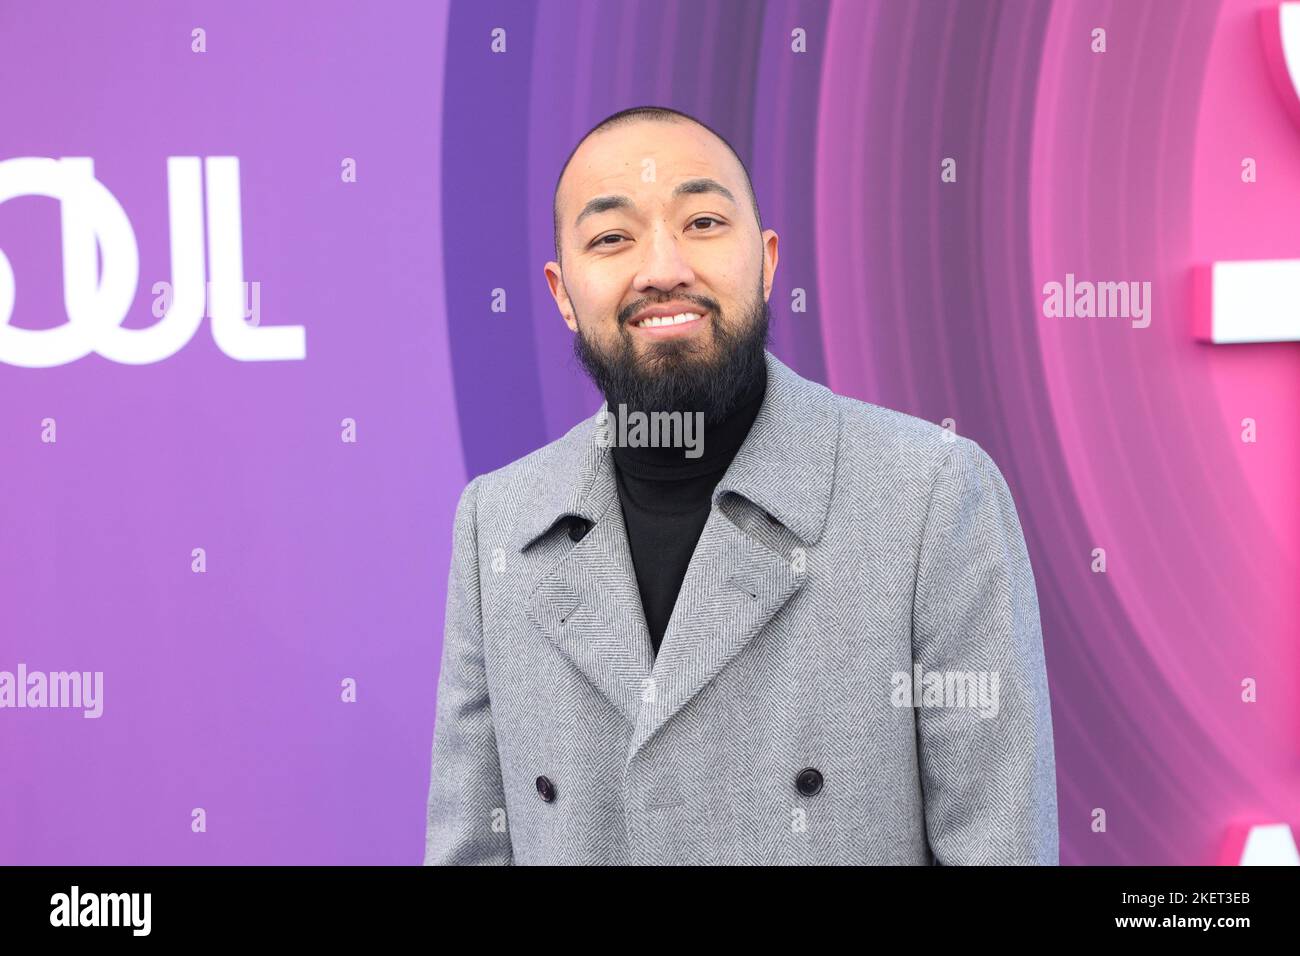 Brian Rikuda, Executive VP of Enterprise Growth Strategy, Business Operations and Programming Strategy bei BET, kommt am Sonntag, den 13. November 2022, zu den Soul Train Awards 2022 in der Orleans Arena im Orleans Hotel and Casino in Las Vegas, Nevada, an. Foto von James Atoa/UPI Stockfoto